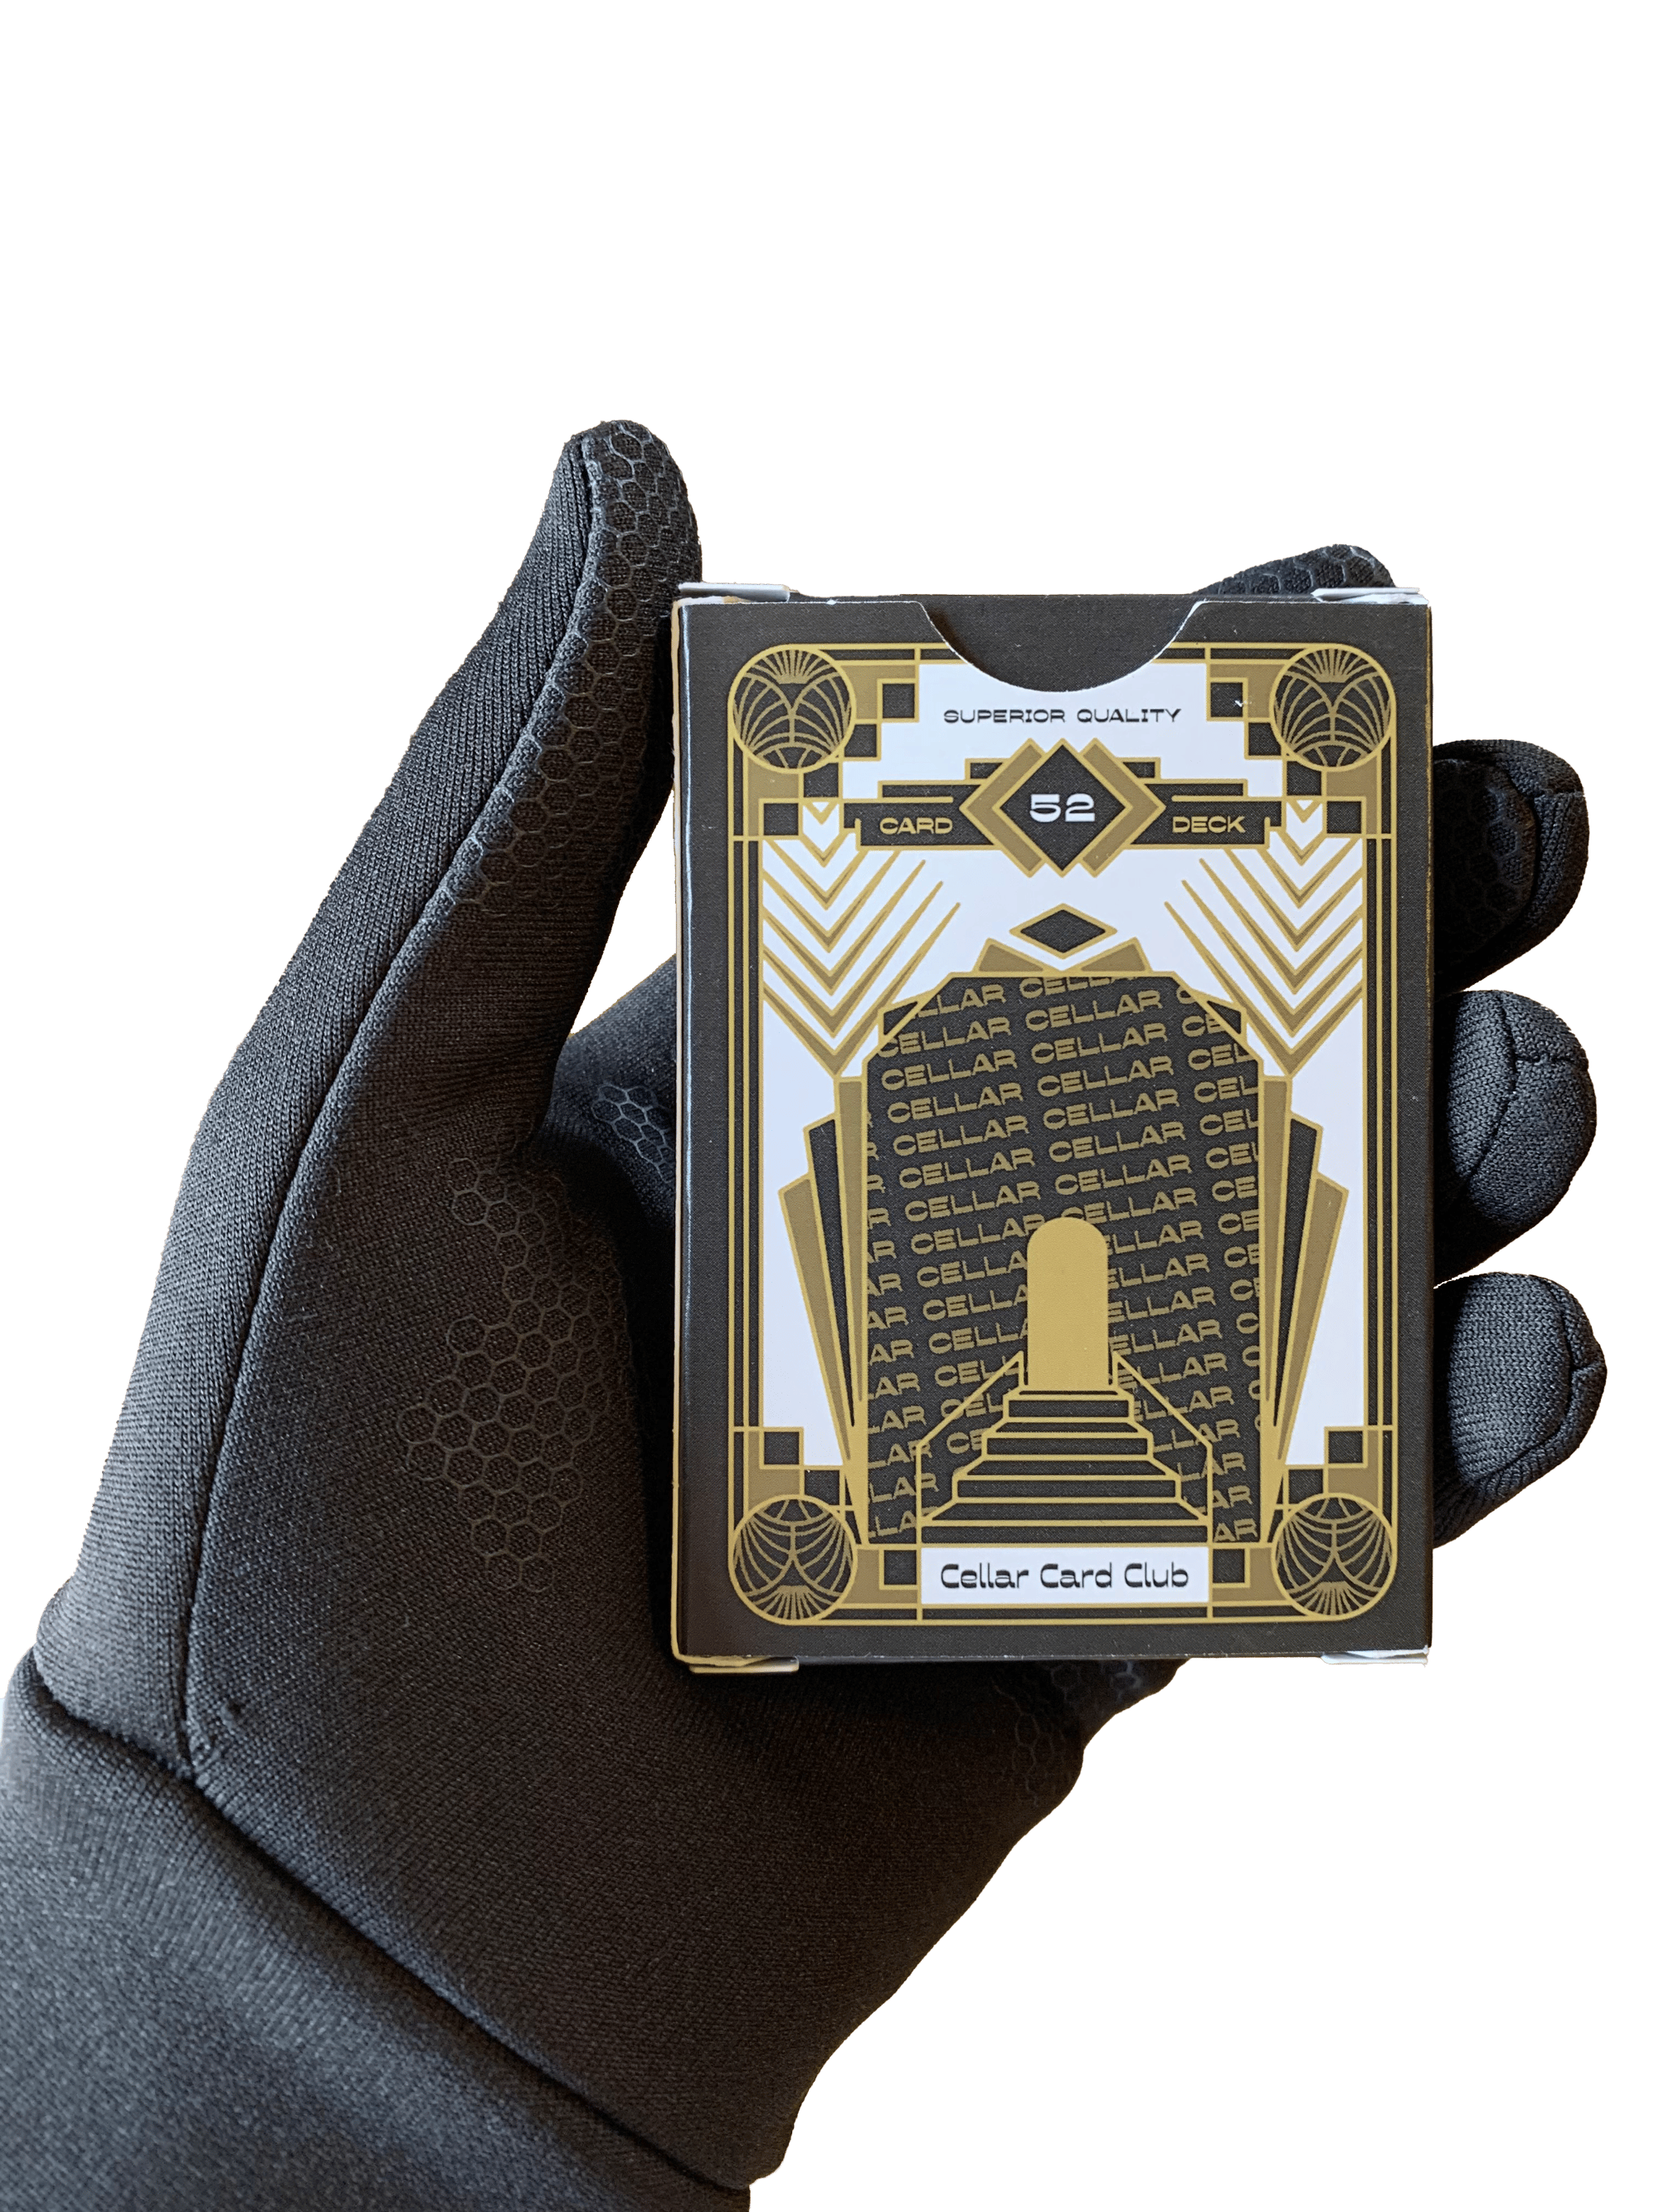 ccc-playing-card-deck-cellar-services